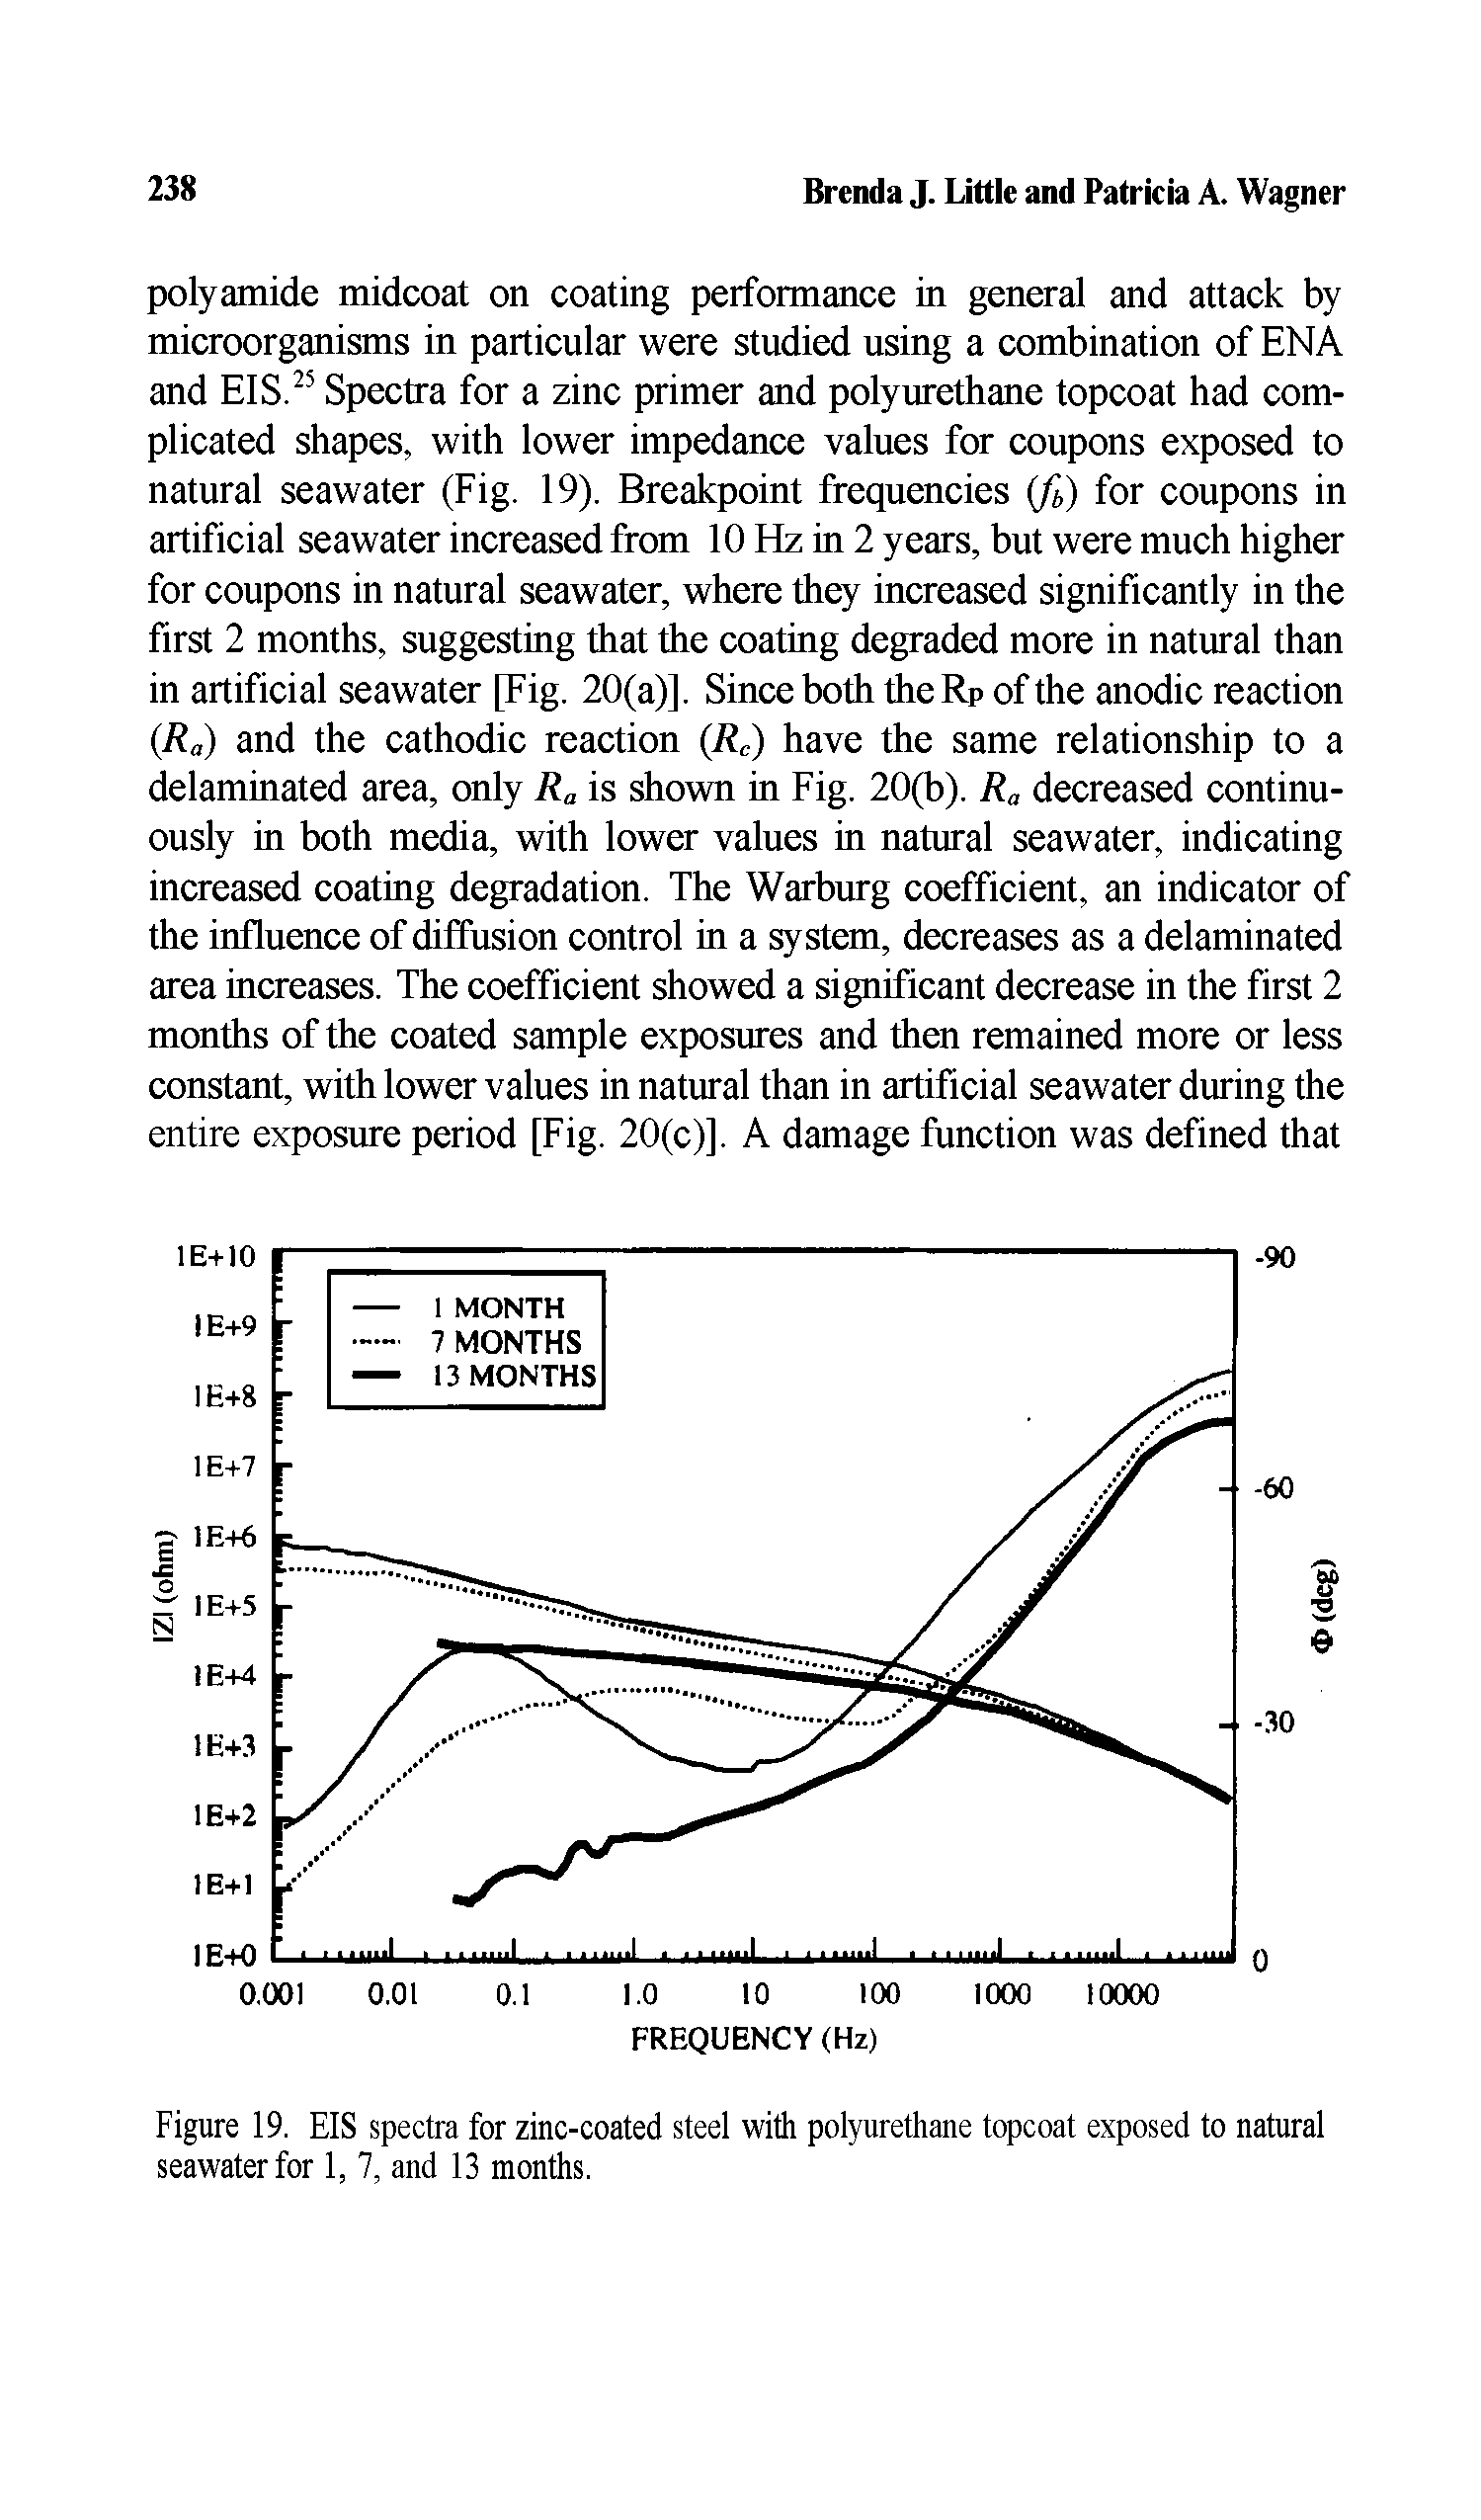 Figure 19. EIS spectra for zinc-coated steel with polyurethane topcoat exposed to natural seawater for 1, 7, and 13 months.